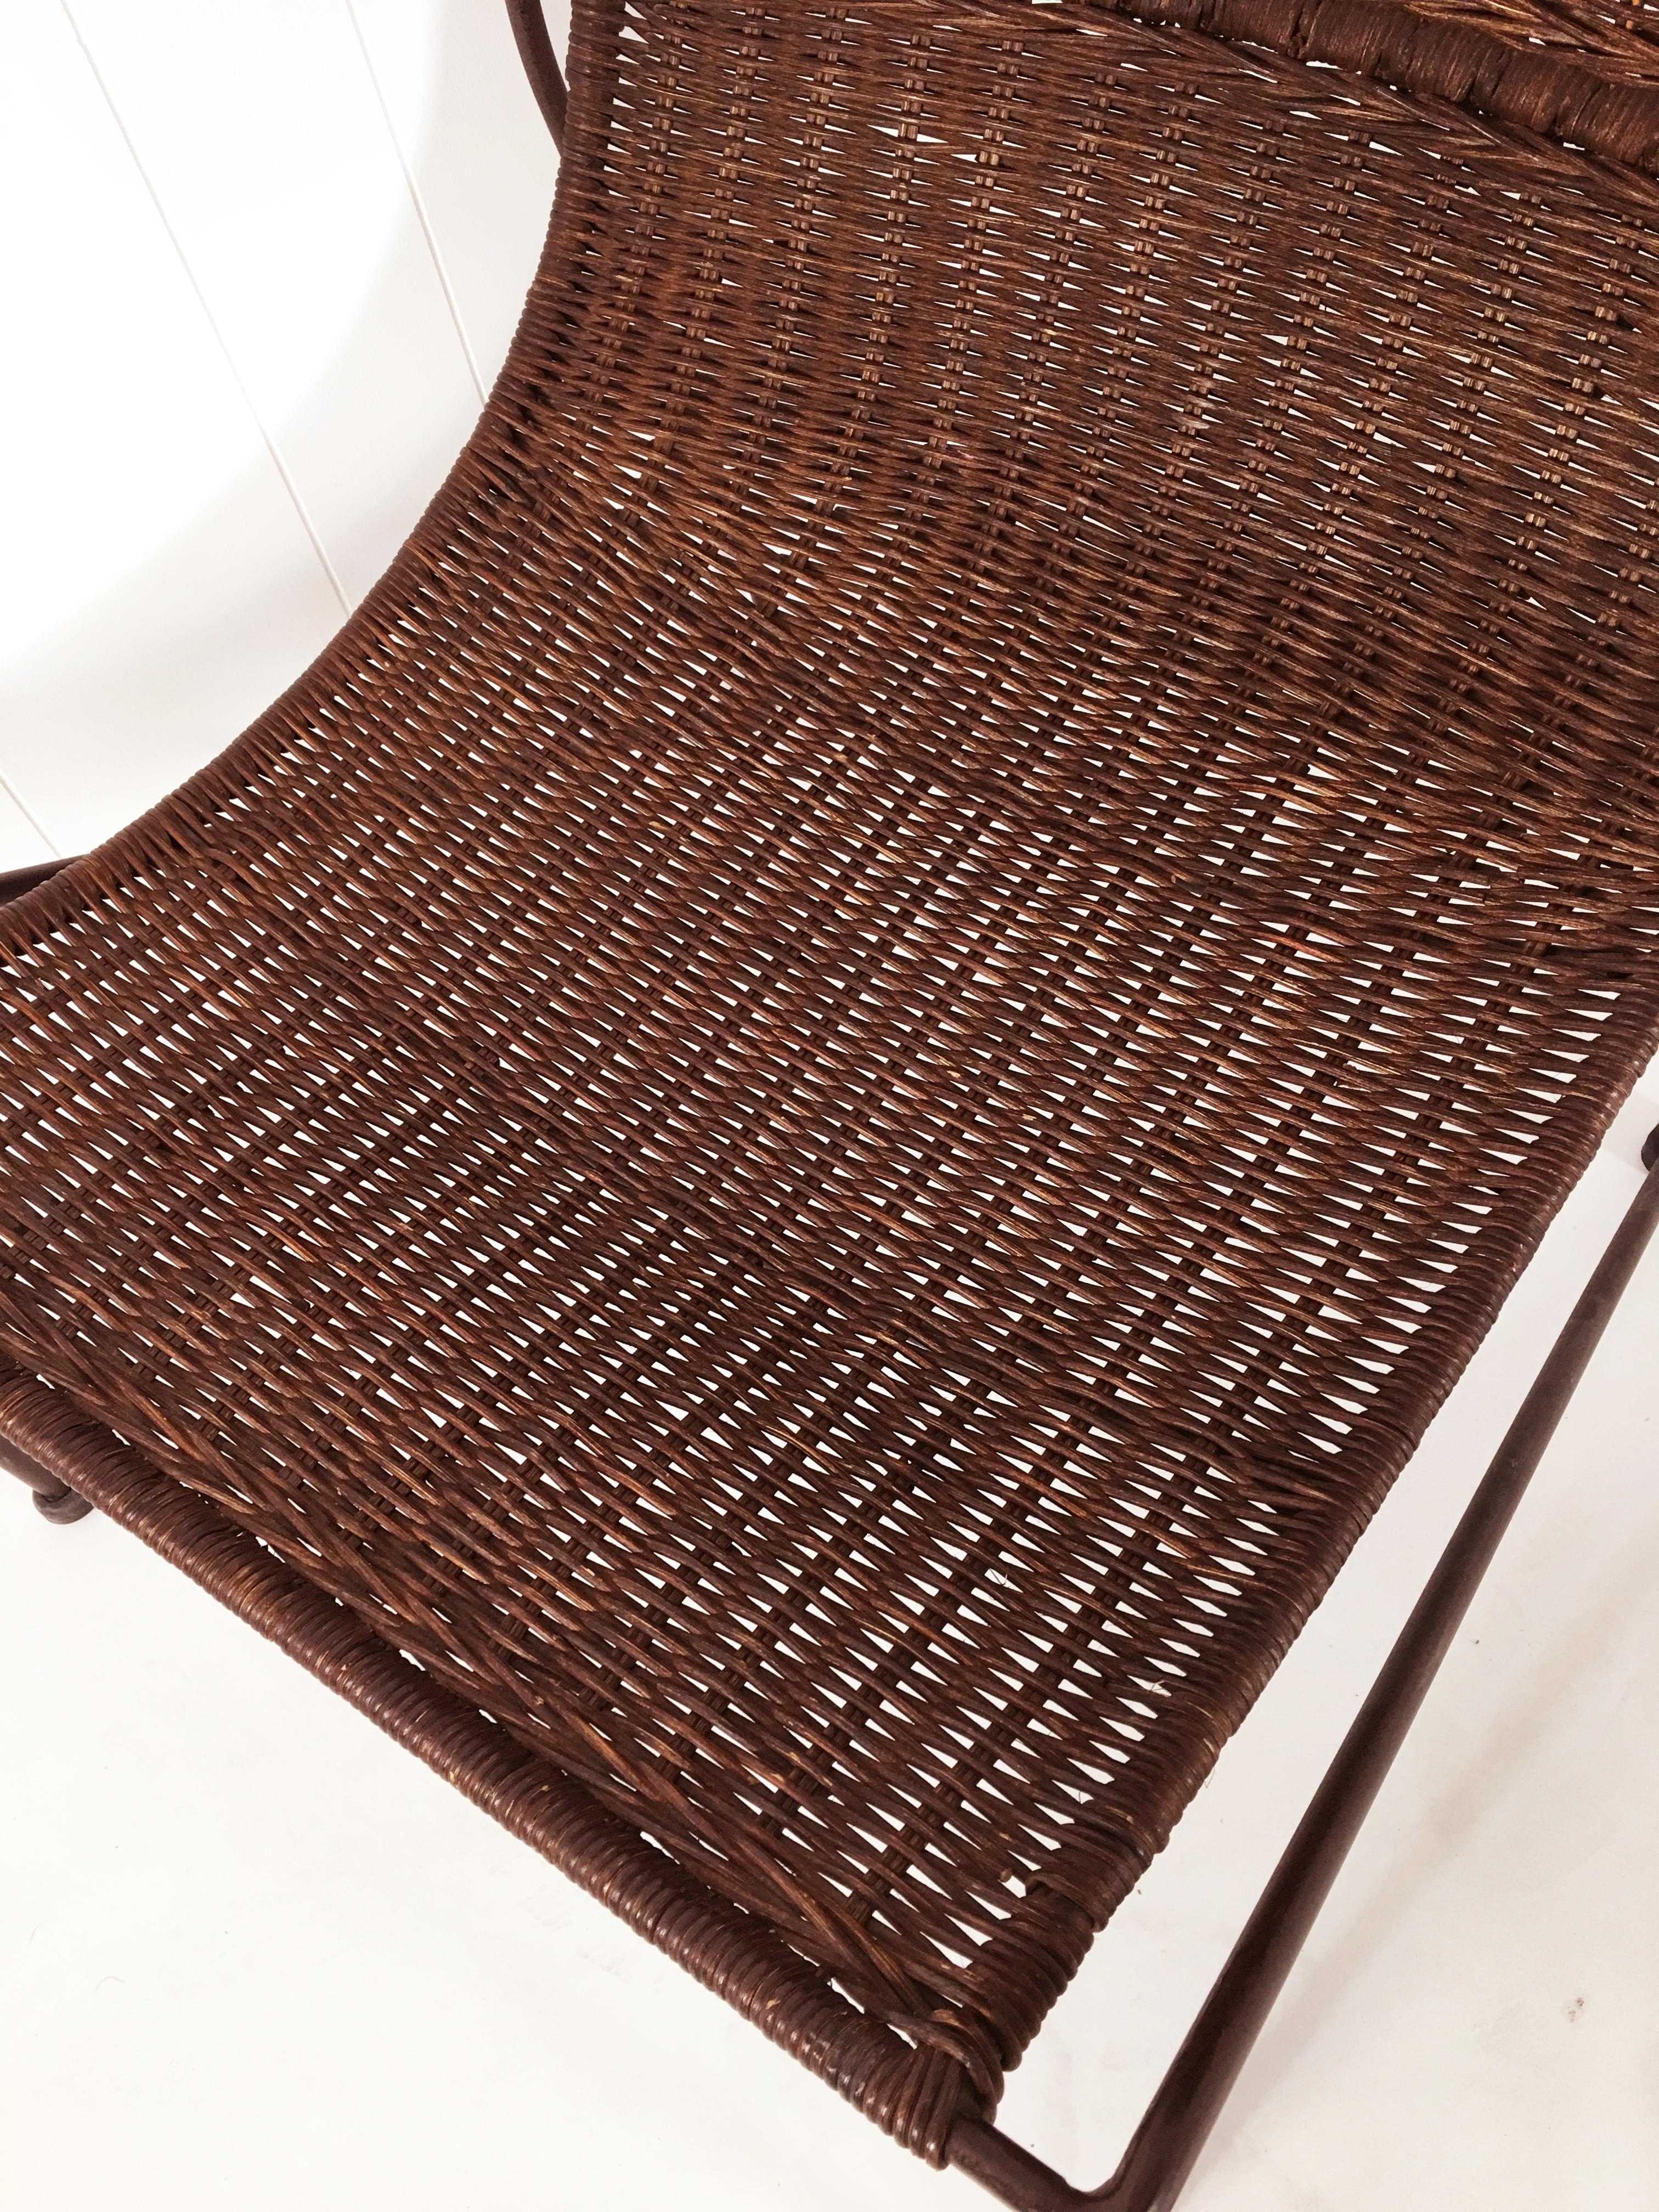 Hand-Woven Pair of Scoop Chairs in Wicker Rattan